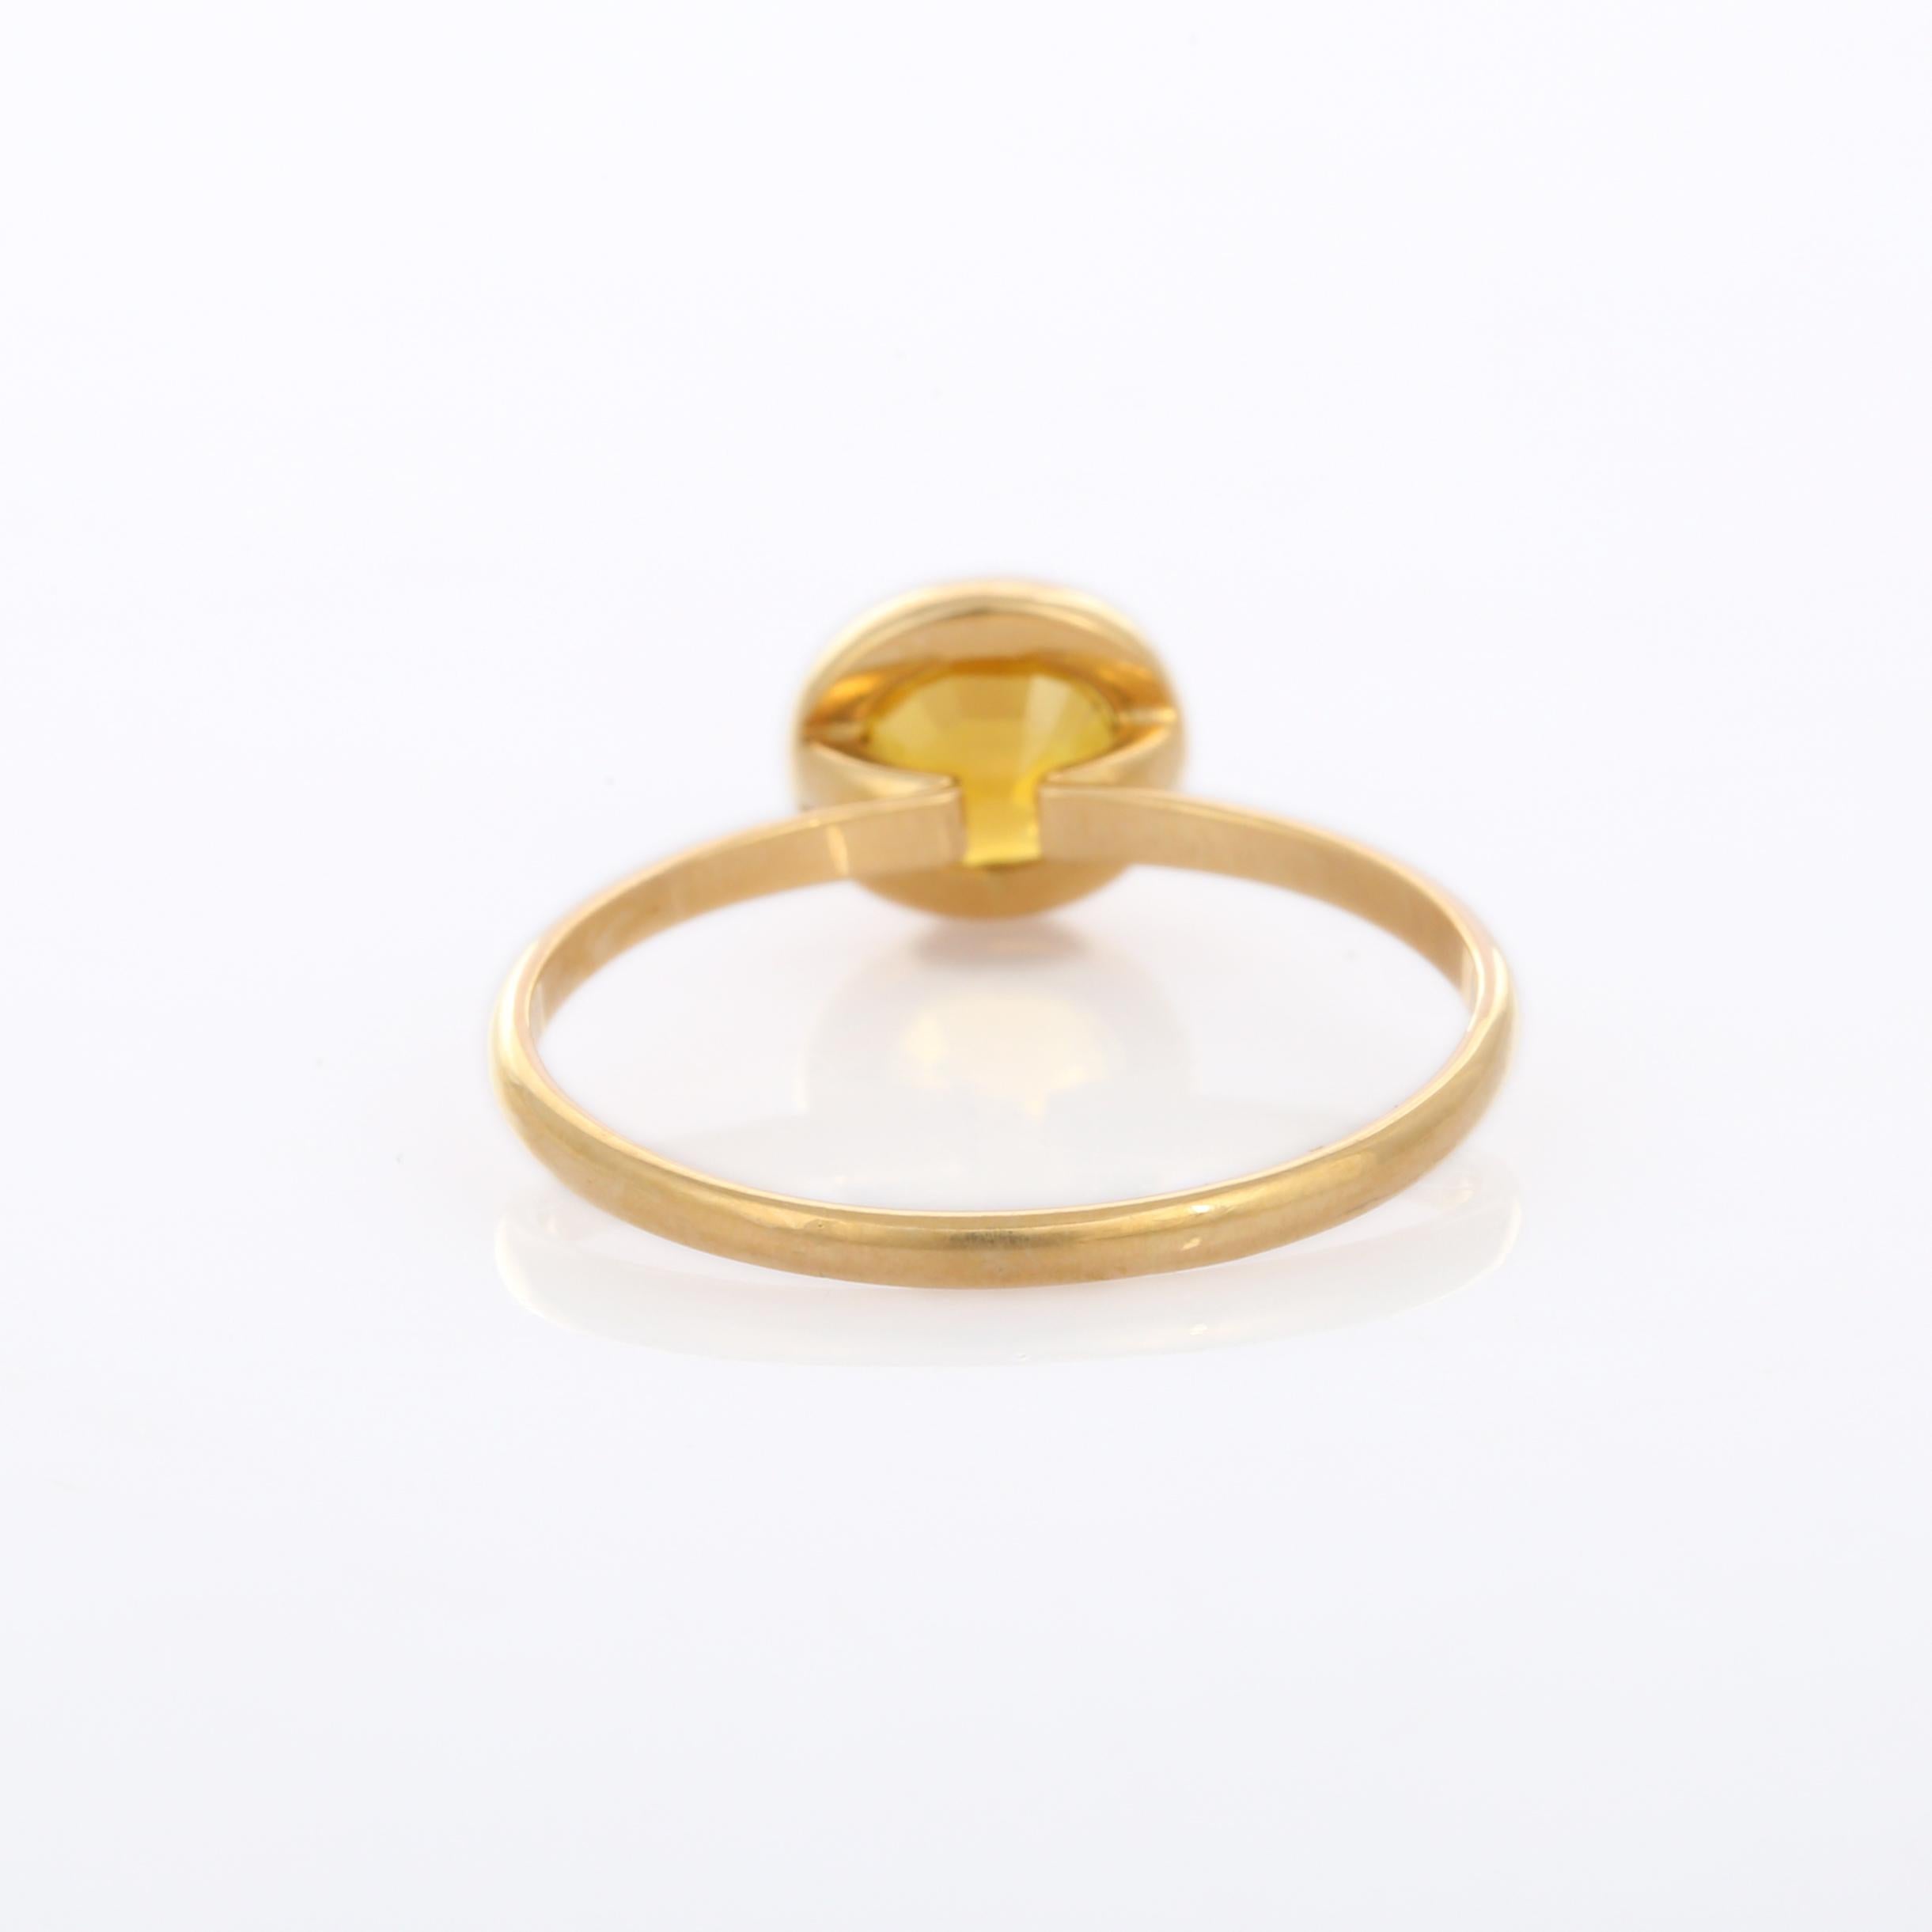 For Sale:  1.05 Carat Yellow Sapphire Solitaire Ring in 18K Yellow Gold 5